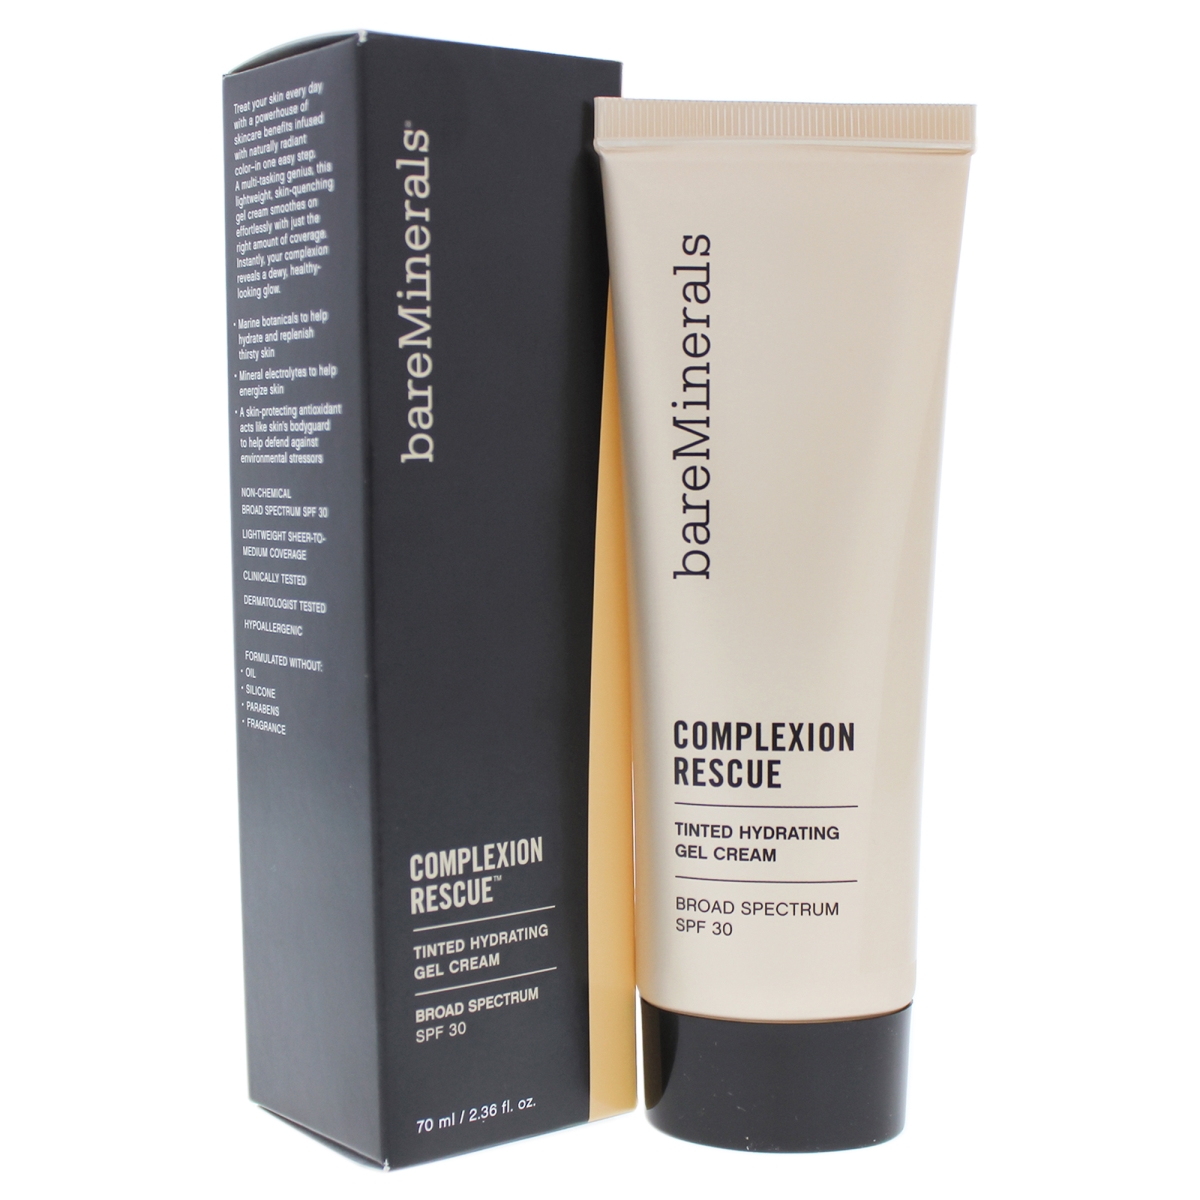 I0085641 2.36 Oz Complexion Rescue Tinted Hydrating Gel Cream Spf 30 For Womens - 06 Ginger